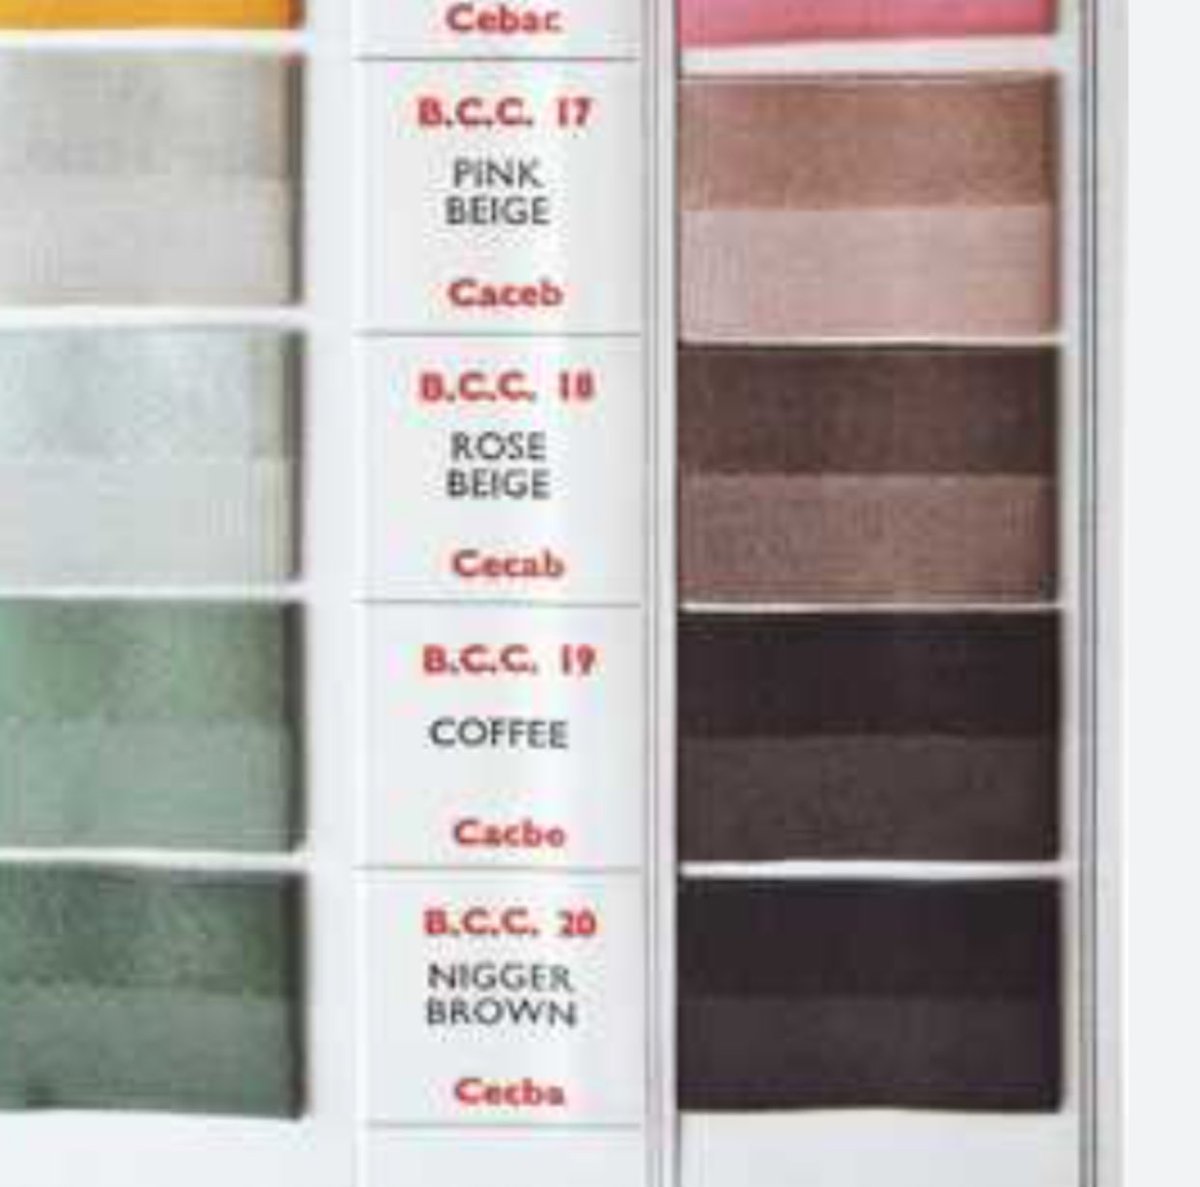 Yes, it was a thing. Colour swatches from “The British Colour Council Dictionary of Colour Standards” in 1951.